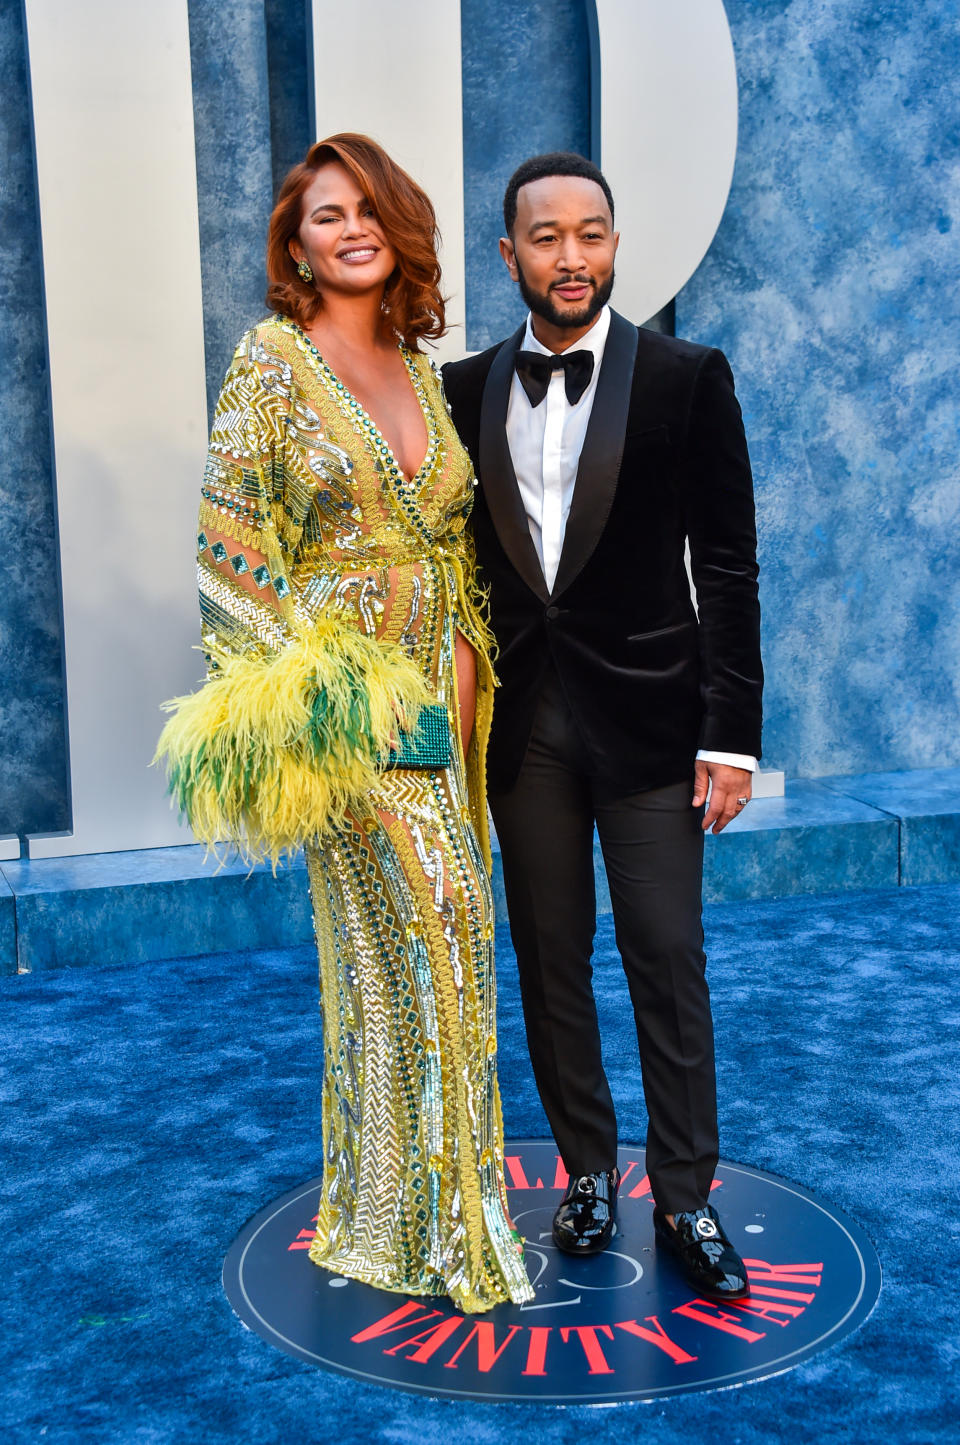 Chrissy Teigen and John Legend arrive at the 2023 Vanity Fair Oscar Party held at the Wallis Annenberg Center for the Performing Arts on March 12, 2023 in Beverly Hills, California.